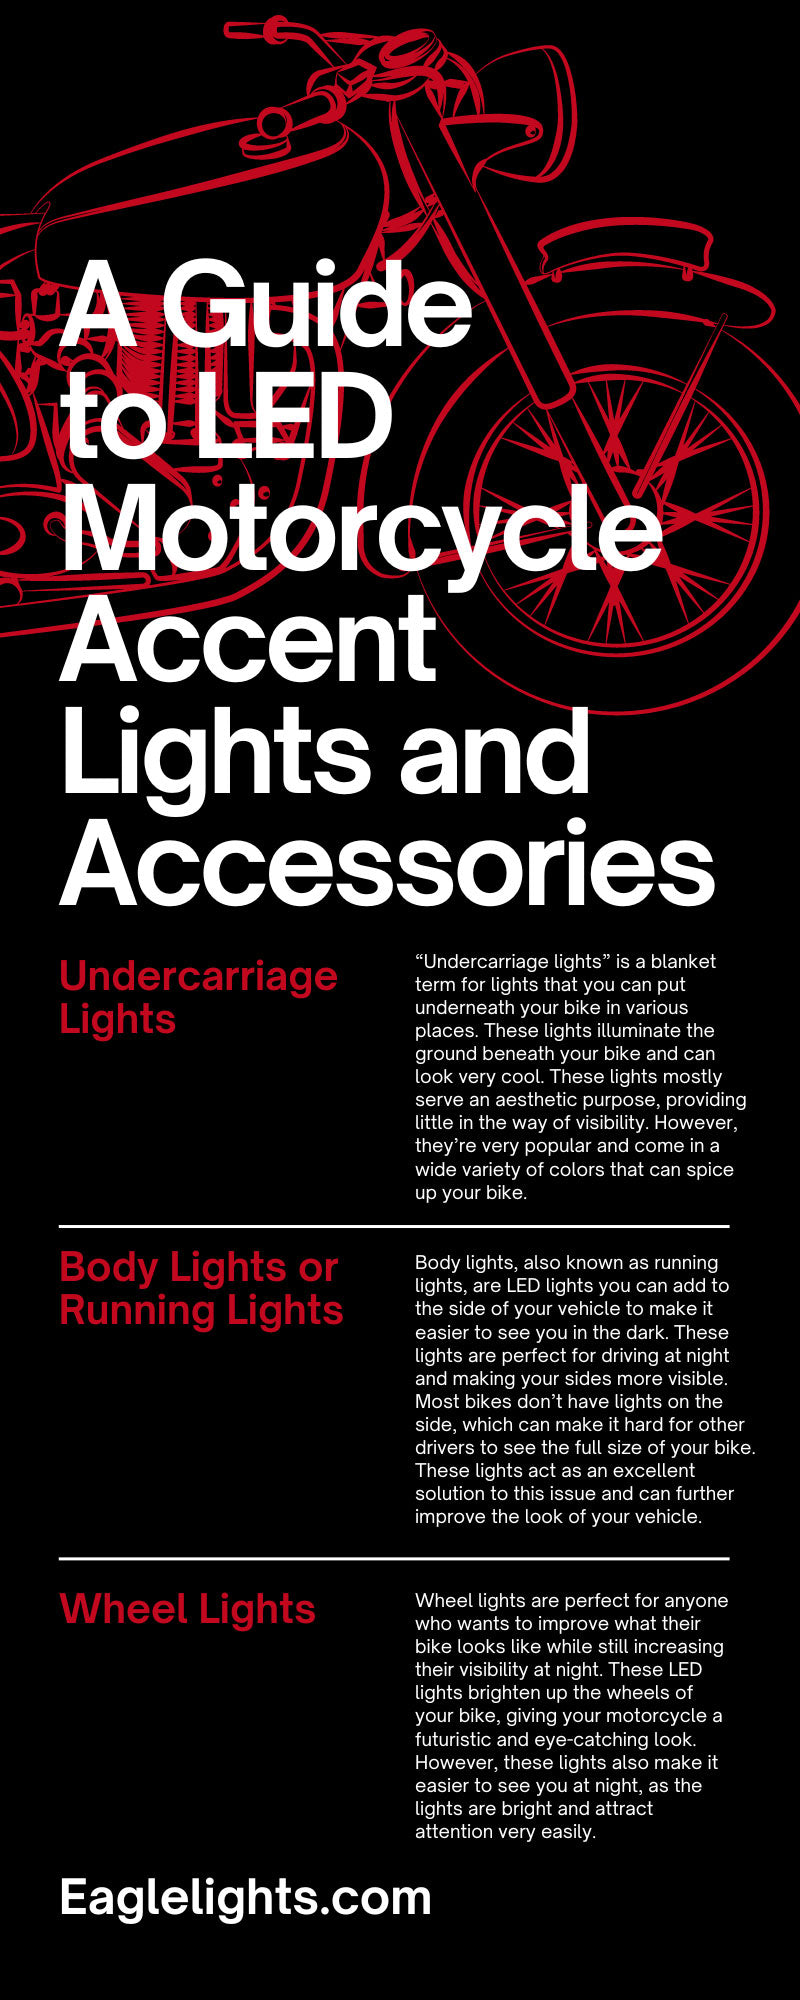 A Guide to LED Motorcycle Accent Lights and Accessories